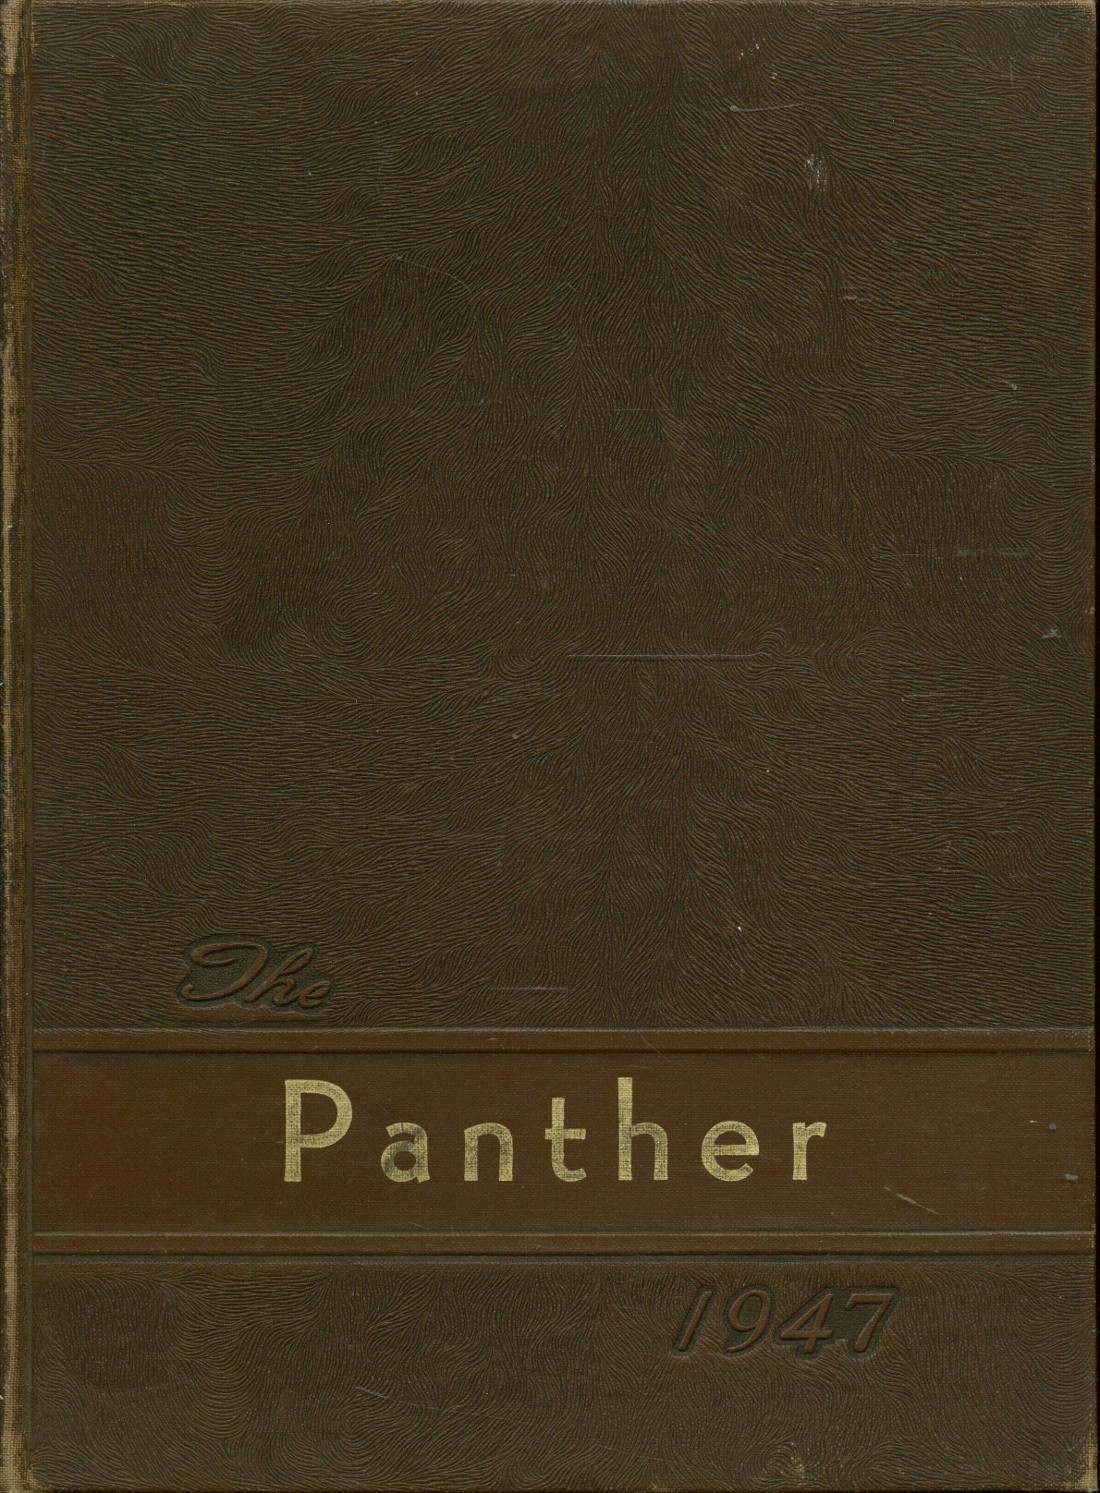 1947 yearbook from Seymour High School from Seymour, Texas for sale